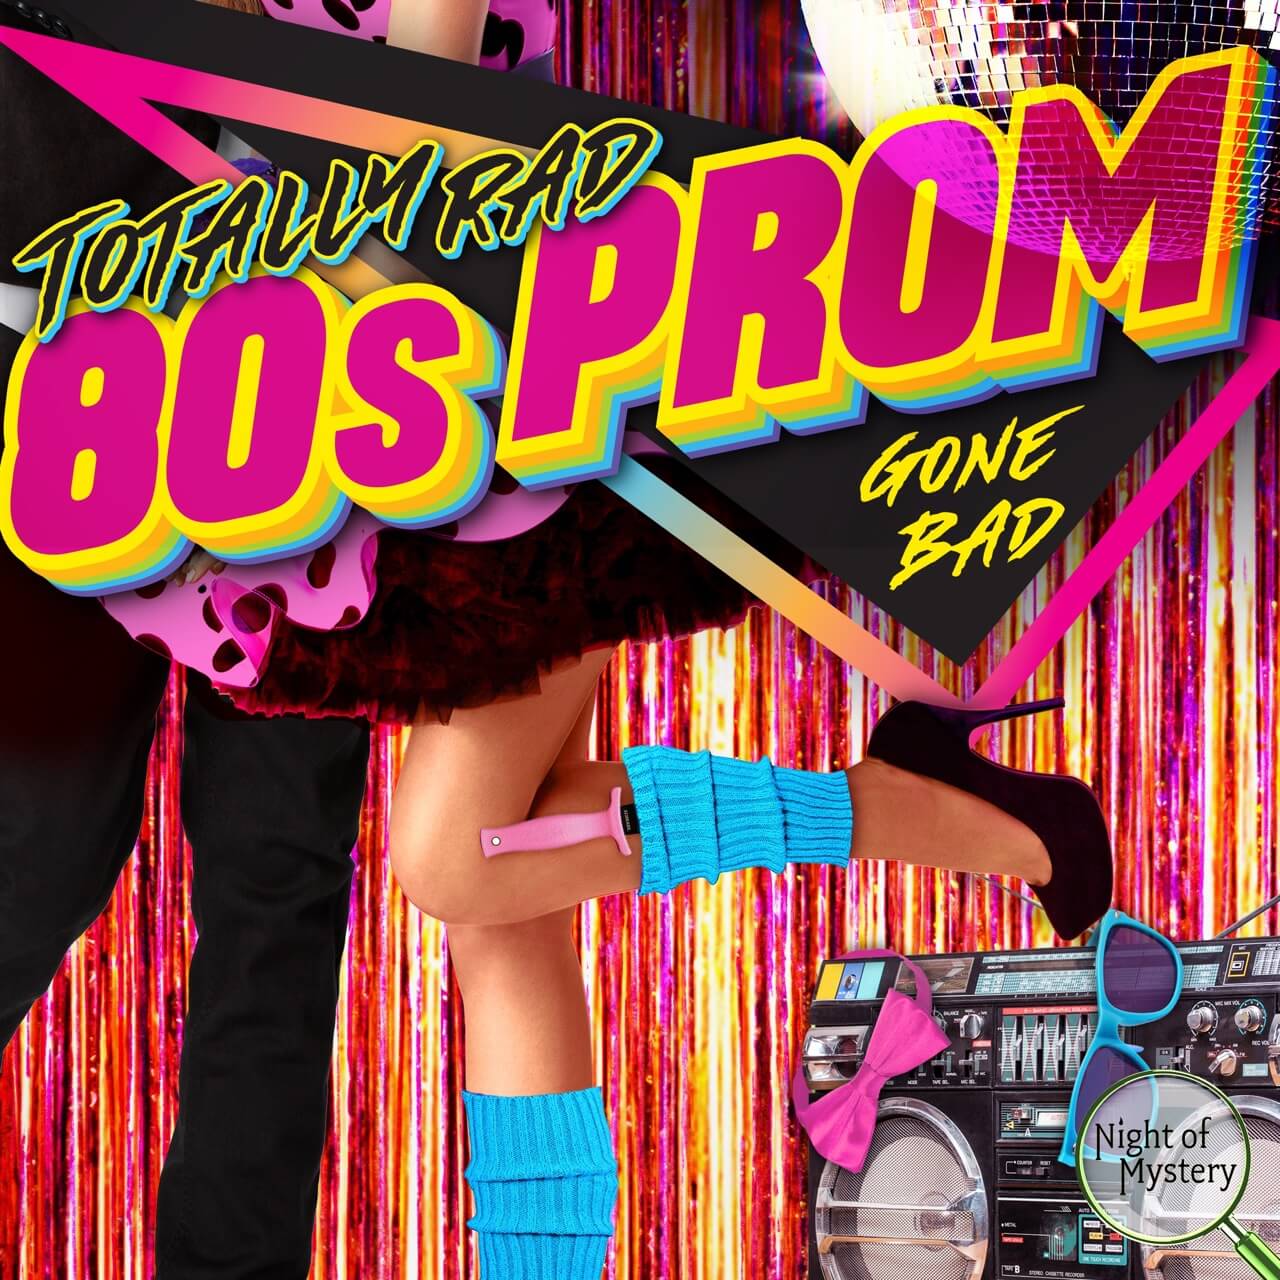 Totally Rad 80s Prom Gone Bad | 80S Prom Murder Mystery